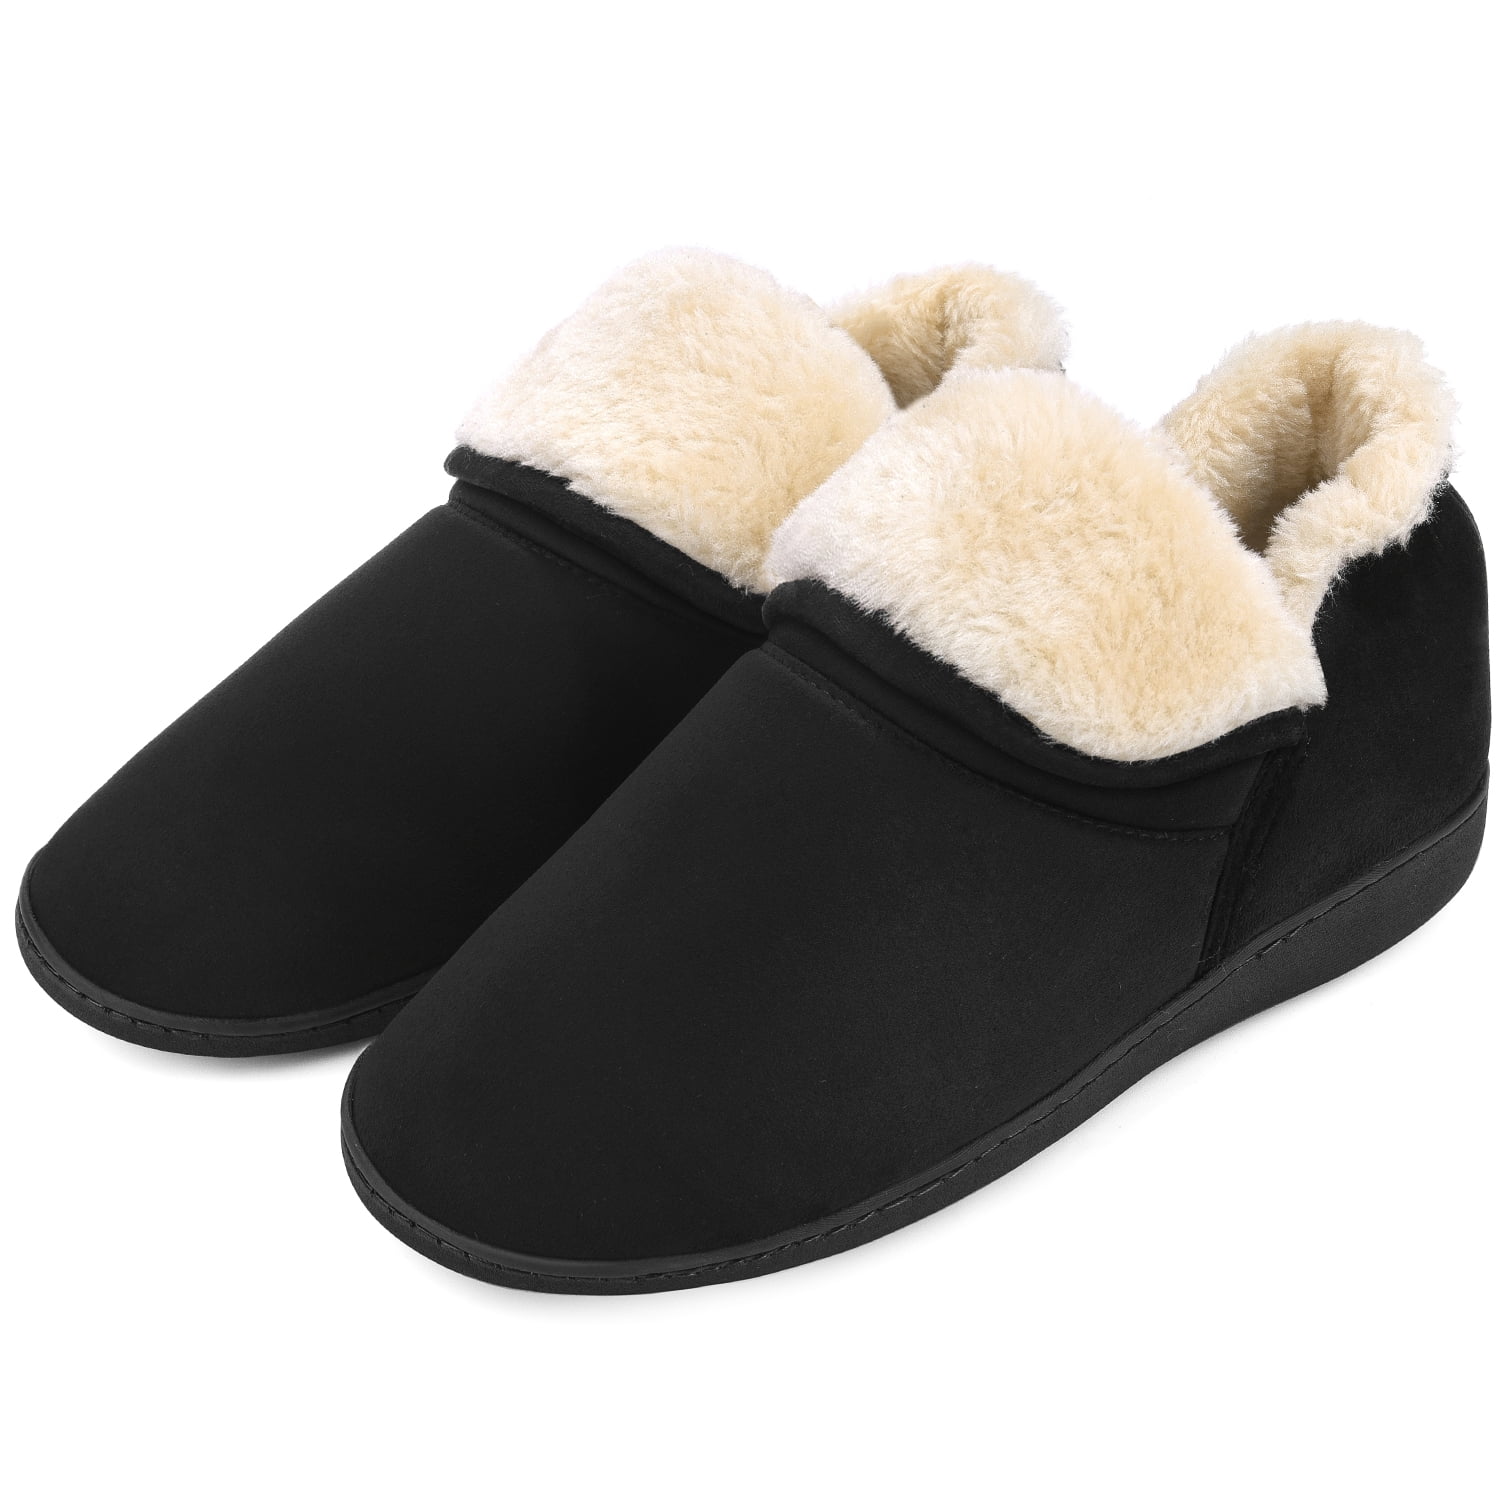 Dunlop Slippers for Women Memory Foam Plush House Slippers Indoor Outdoor Faux Sheepskin Fur Bootie Slippers Women Warm Winter Slipper Ankle Boots Gifts for Ladies 